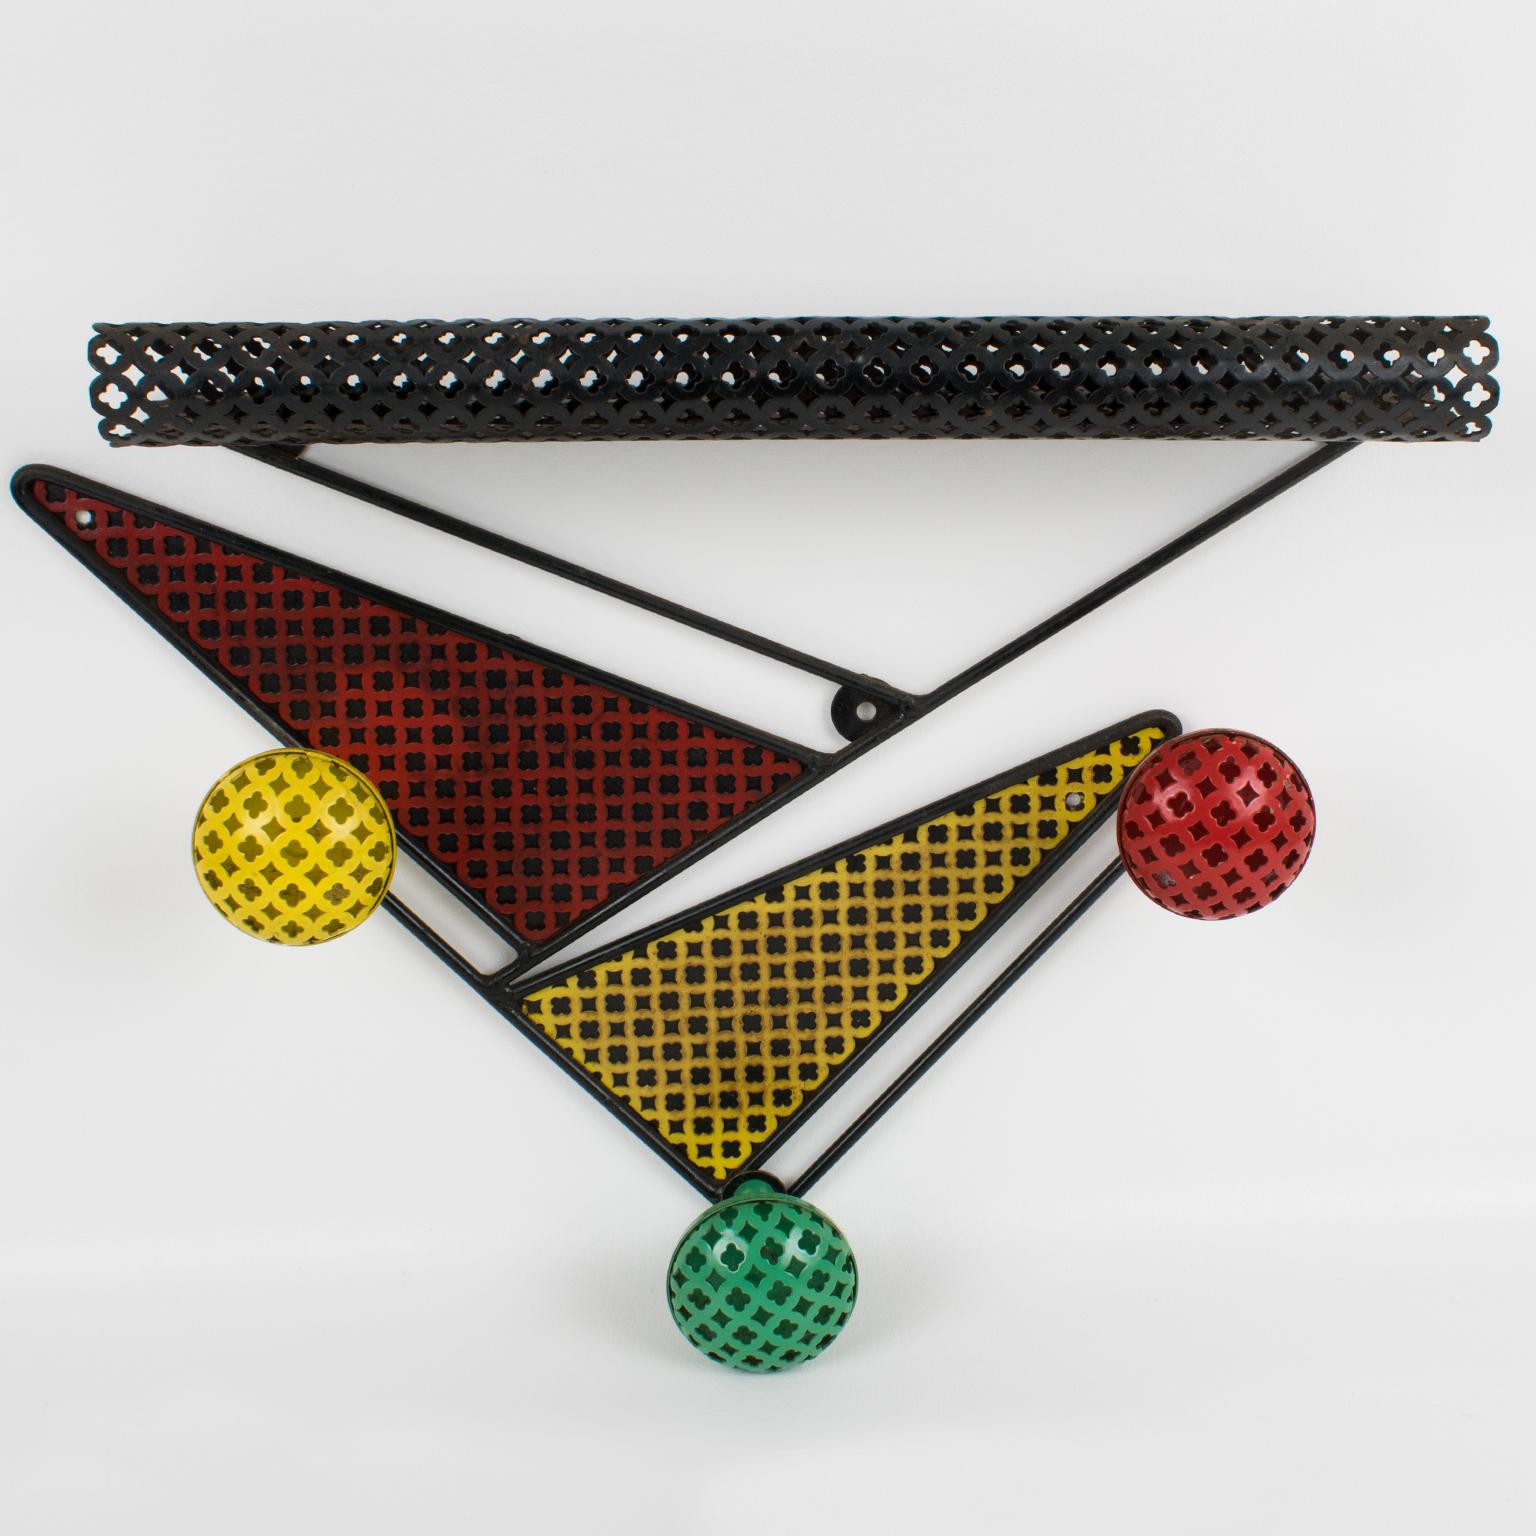 A colorful metal coat rack or hanger with hat stand by French designer Mathieu Mategot (1910 - 2001) from the 1950s. Wall mount black metal frame with 